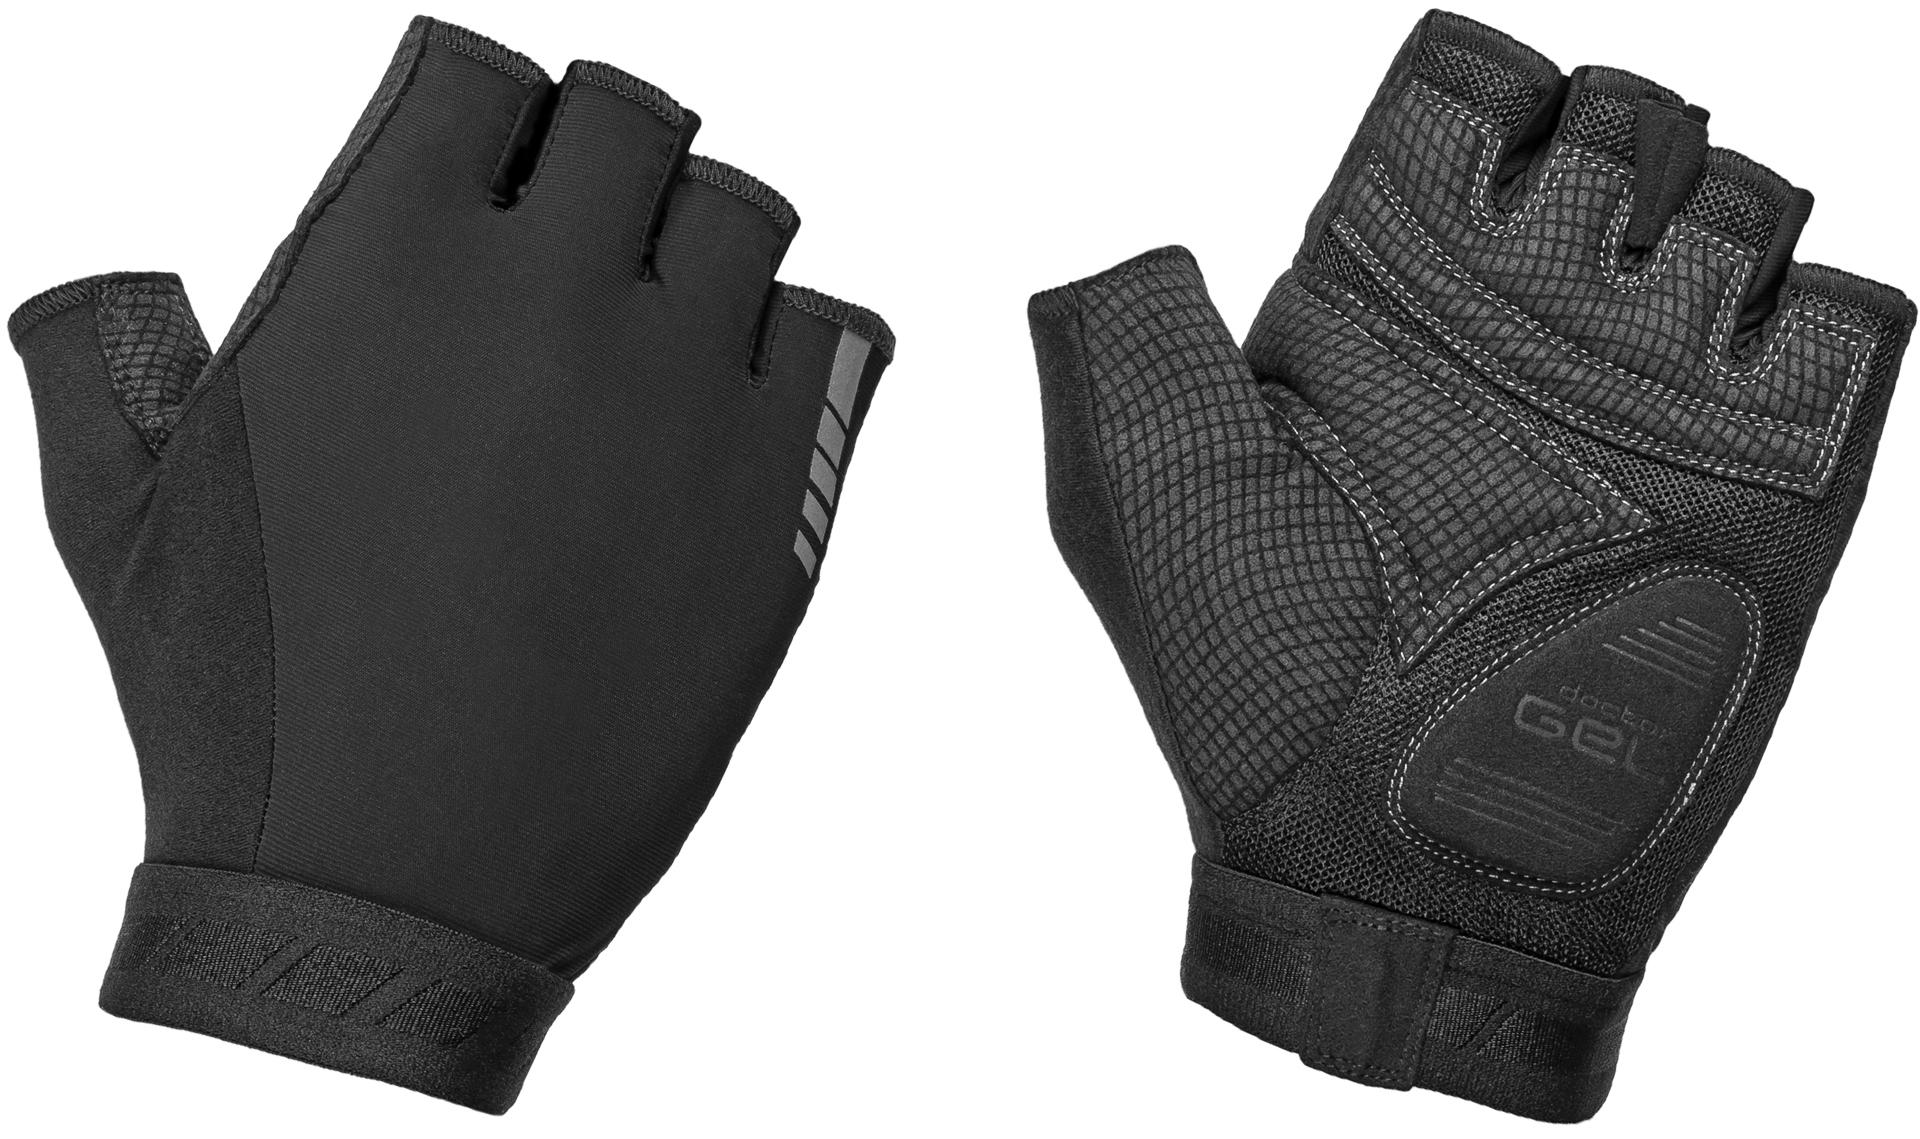 Gripgrab Worldcup Short Finger Padded Cycling Gloves - Black